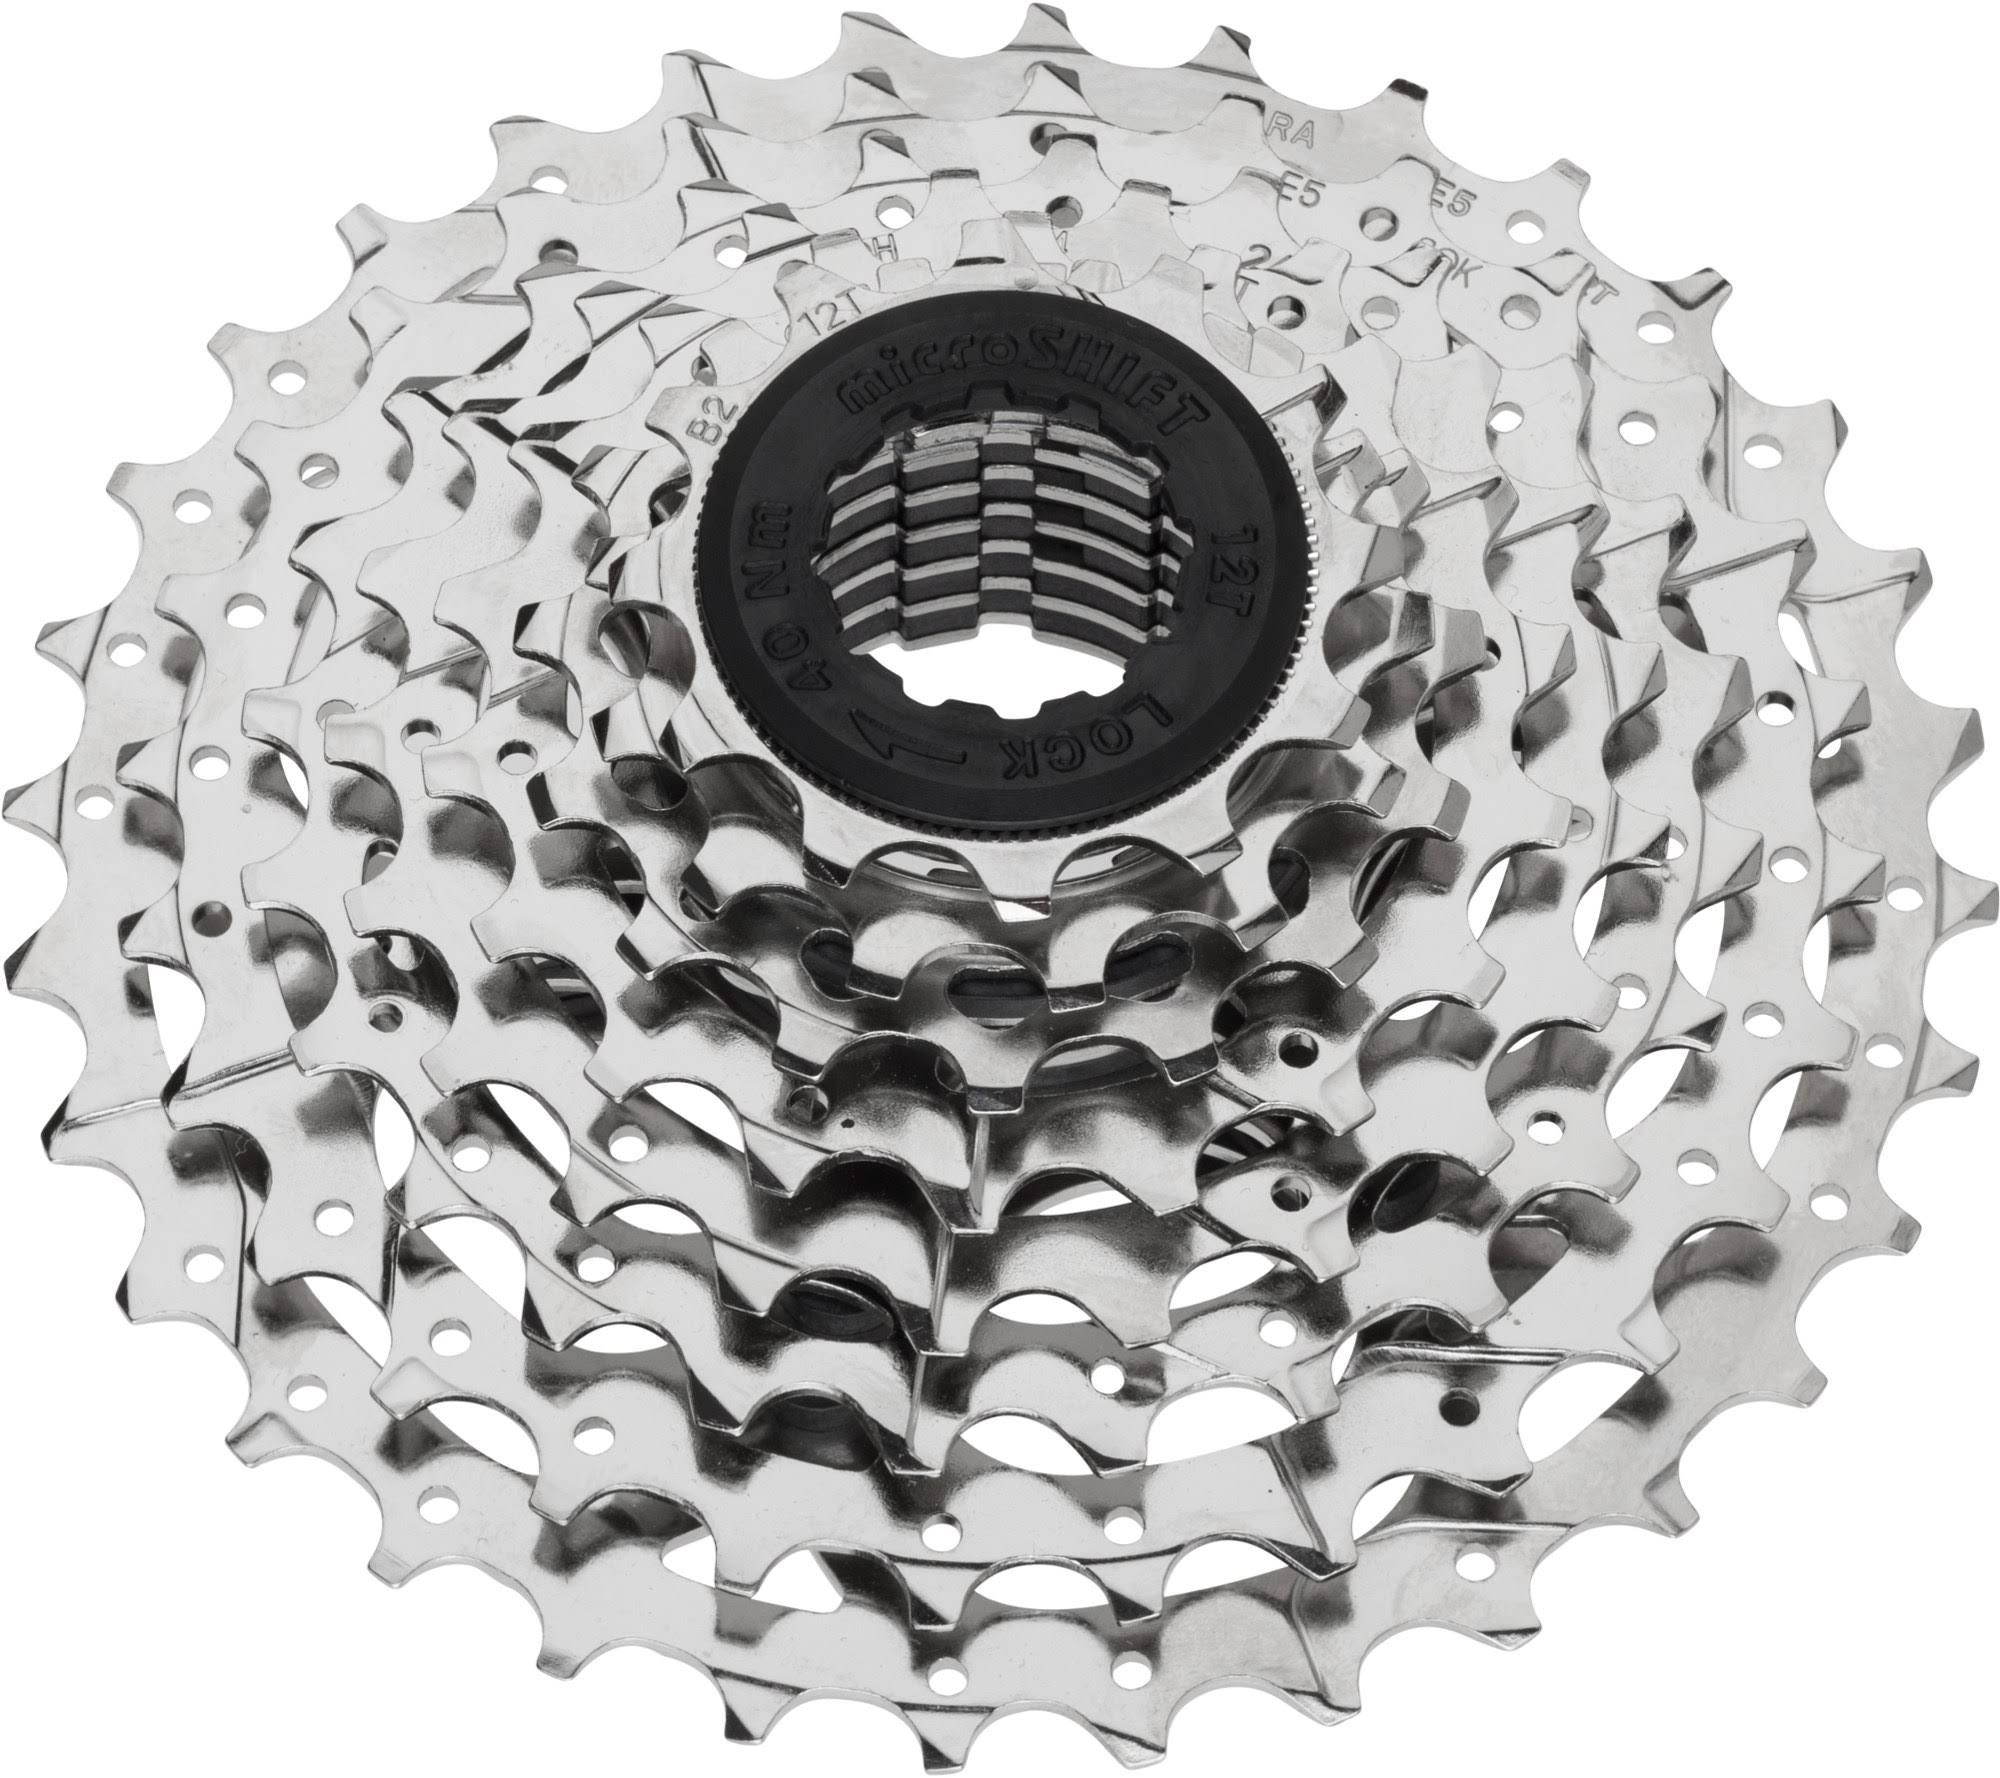 microSHIFT H08 Cassette - 8 Speed 11-32T Silver Nickel Plated